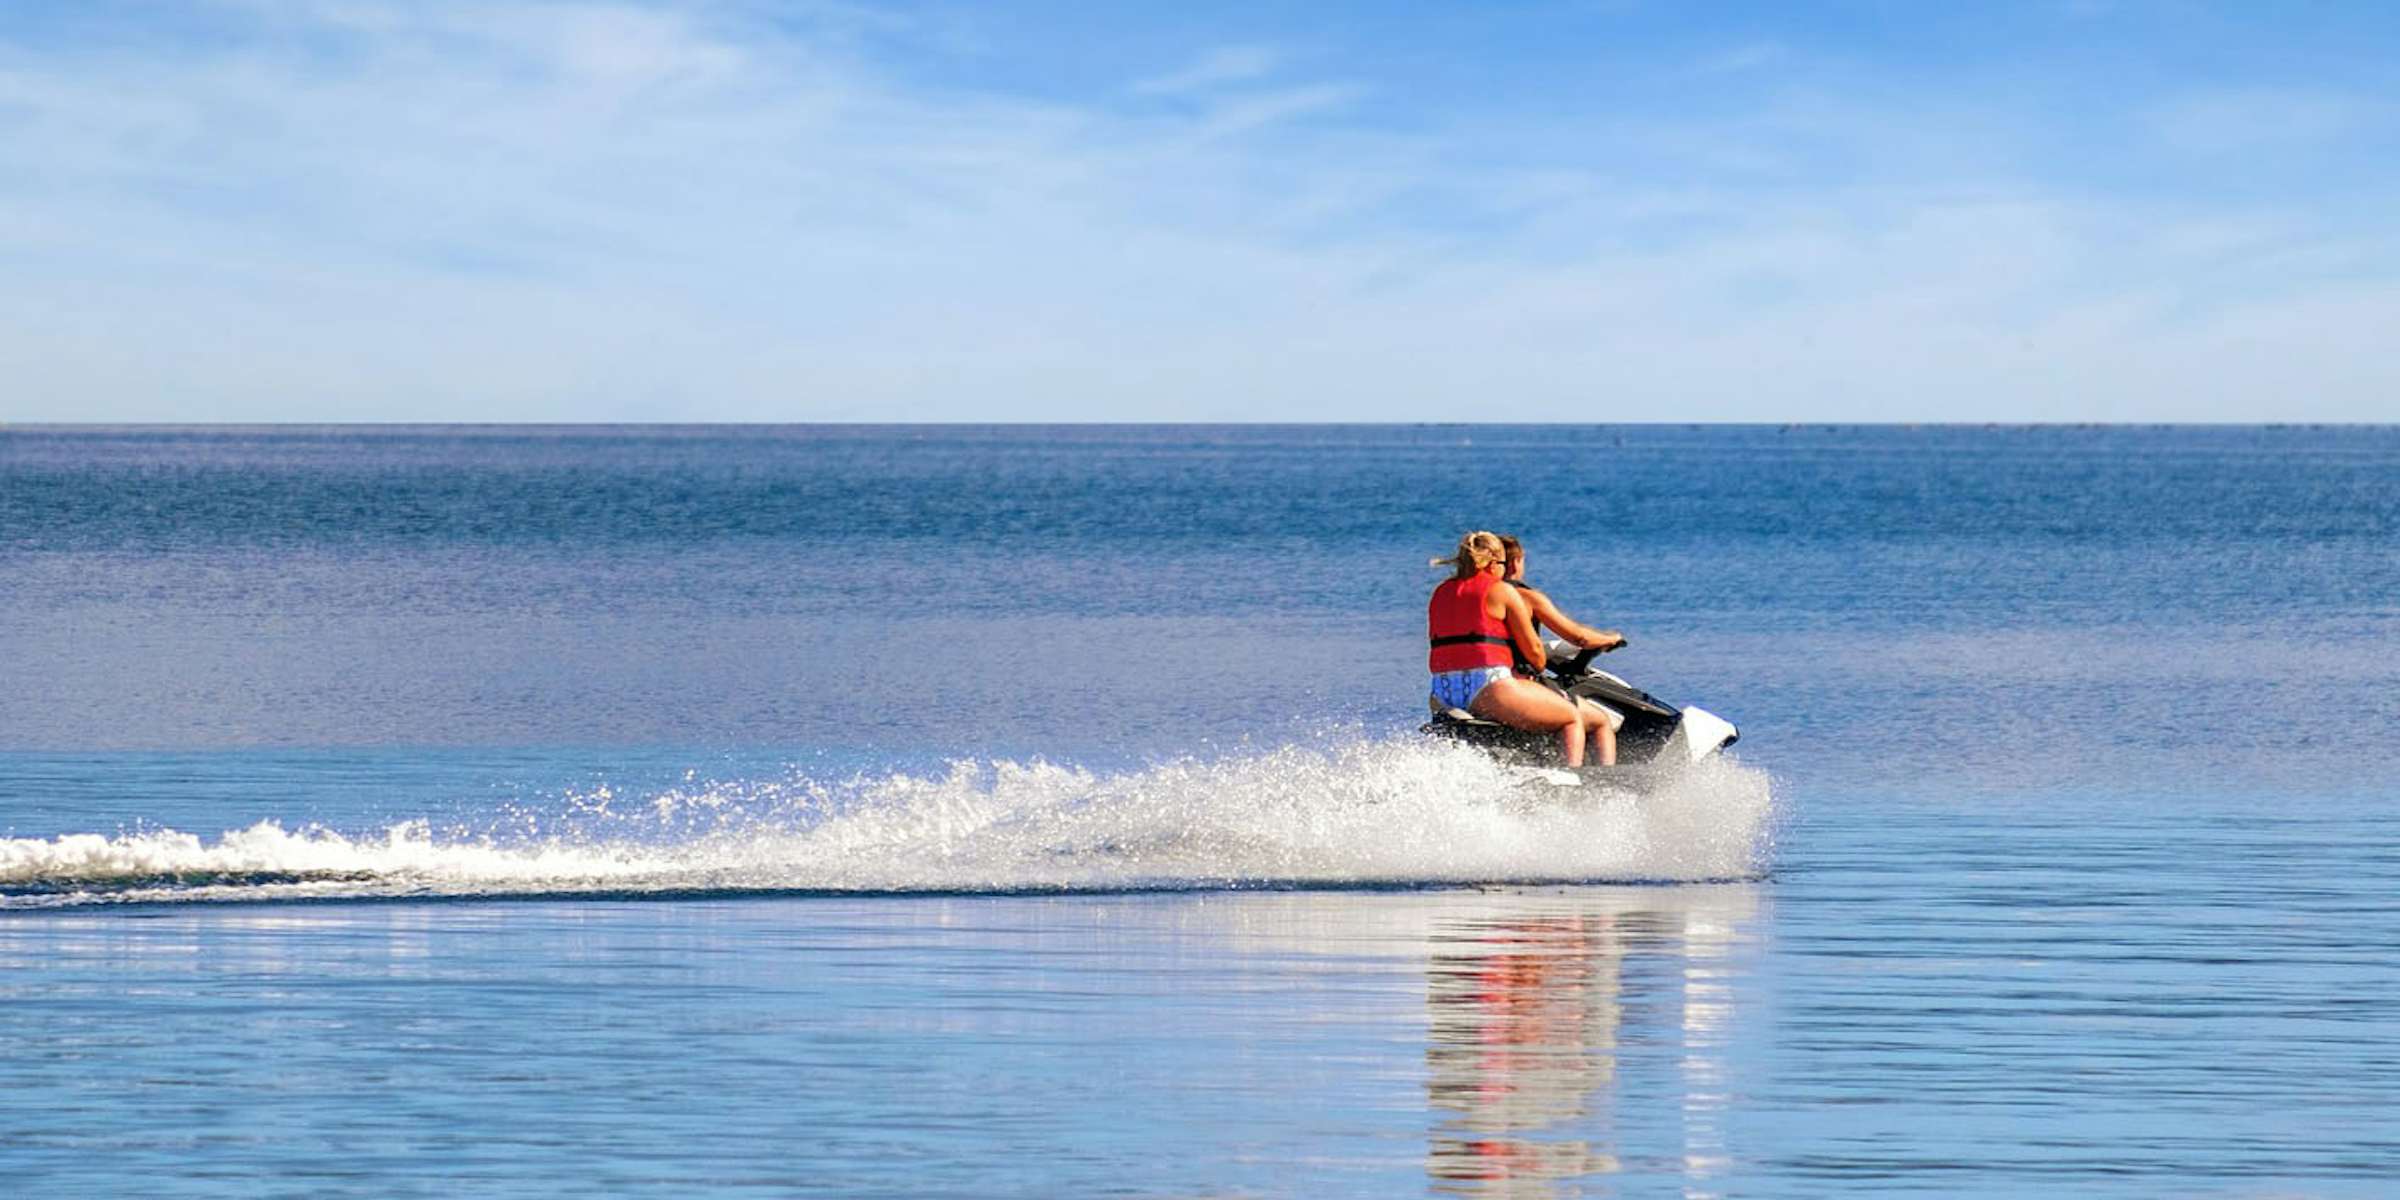 Thinking of buying a jet ski? Here’s what you need to know.